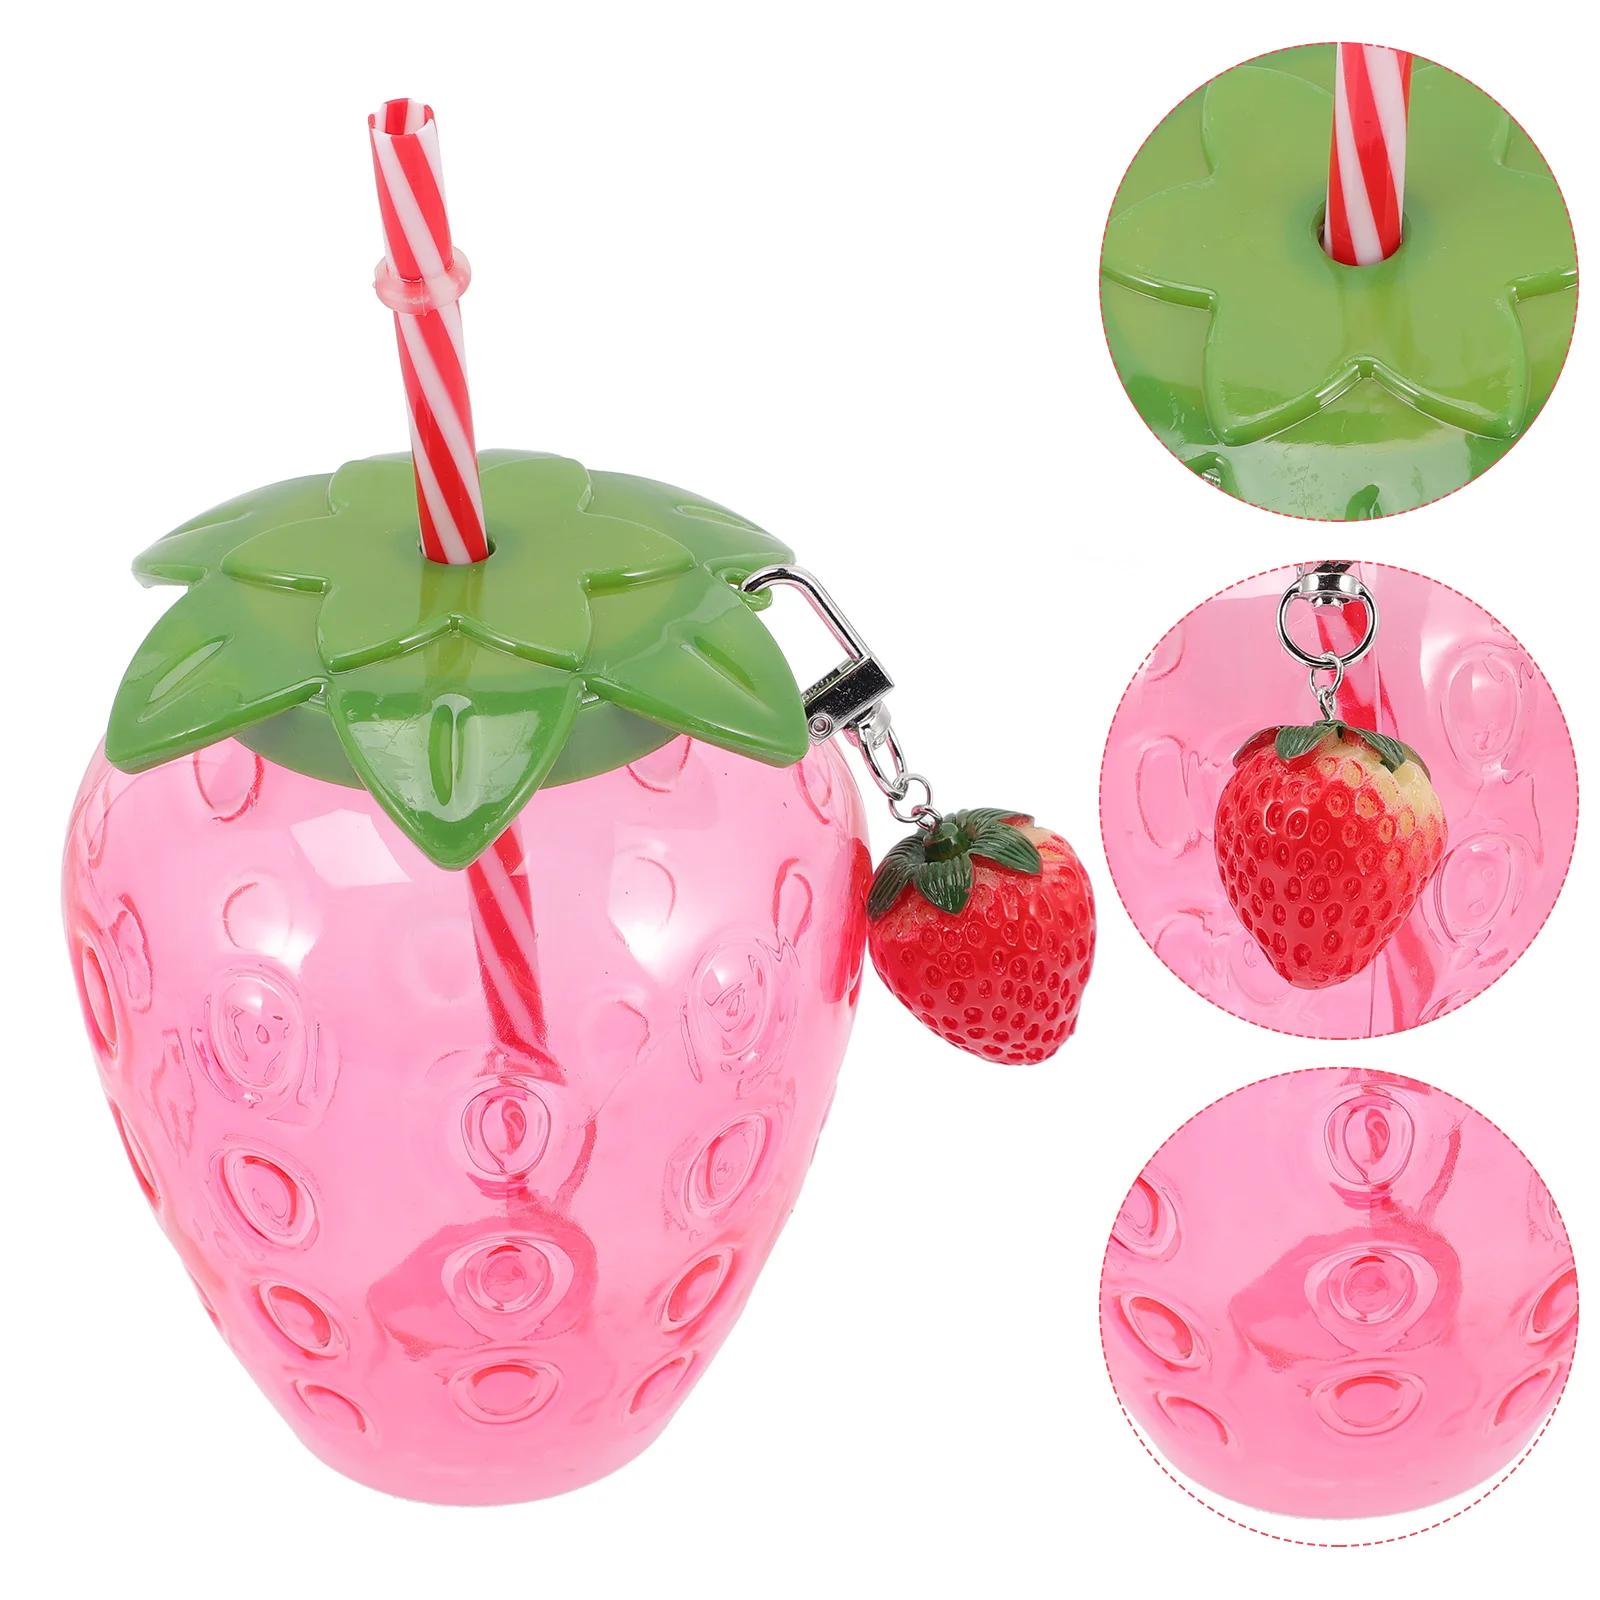 

Strawberry Drinking Cups With Water Coffee Cup With Lid Water Cups Bowl Tropical Party Supplies For Hawaiian Luau Beach Party